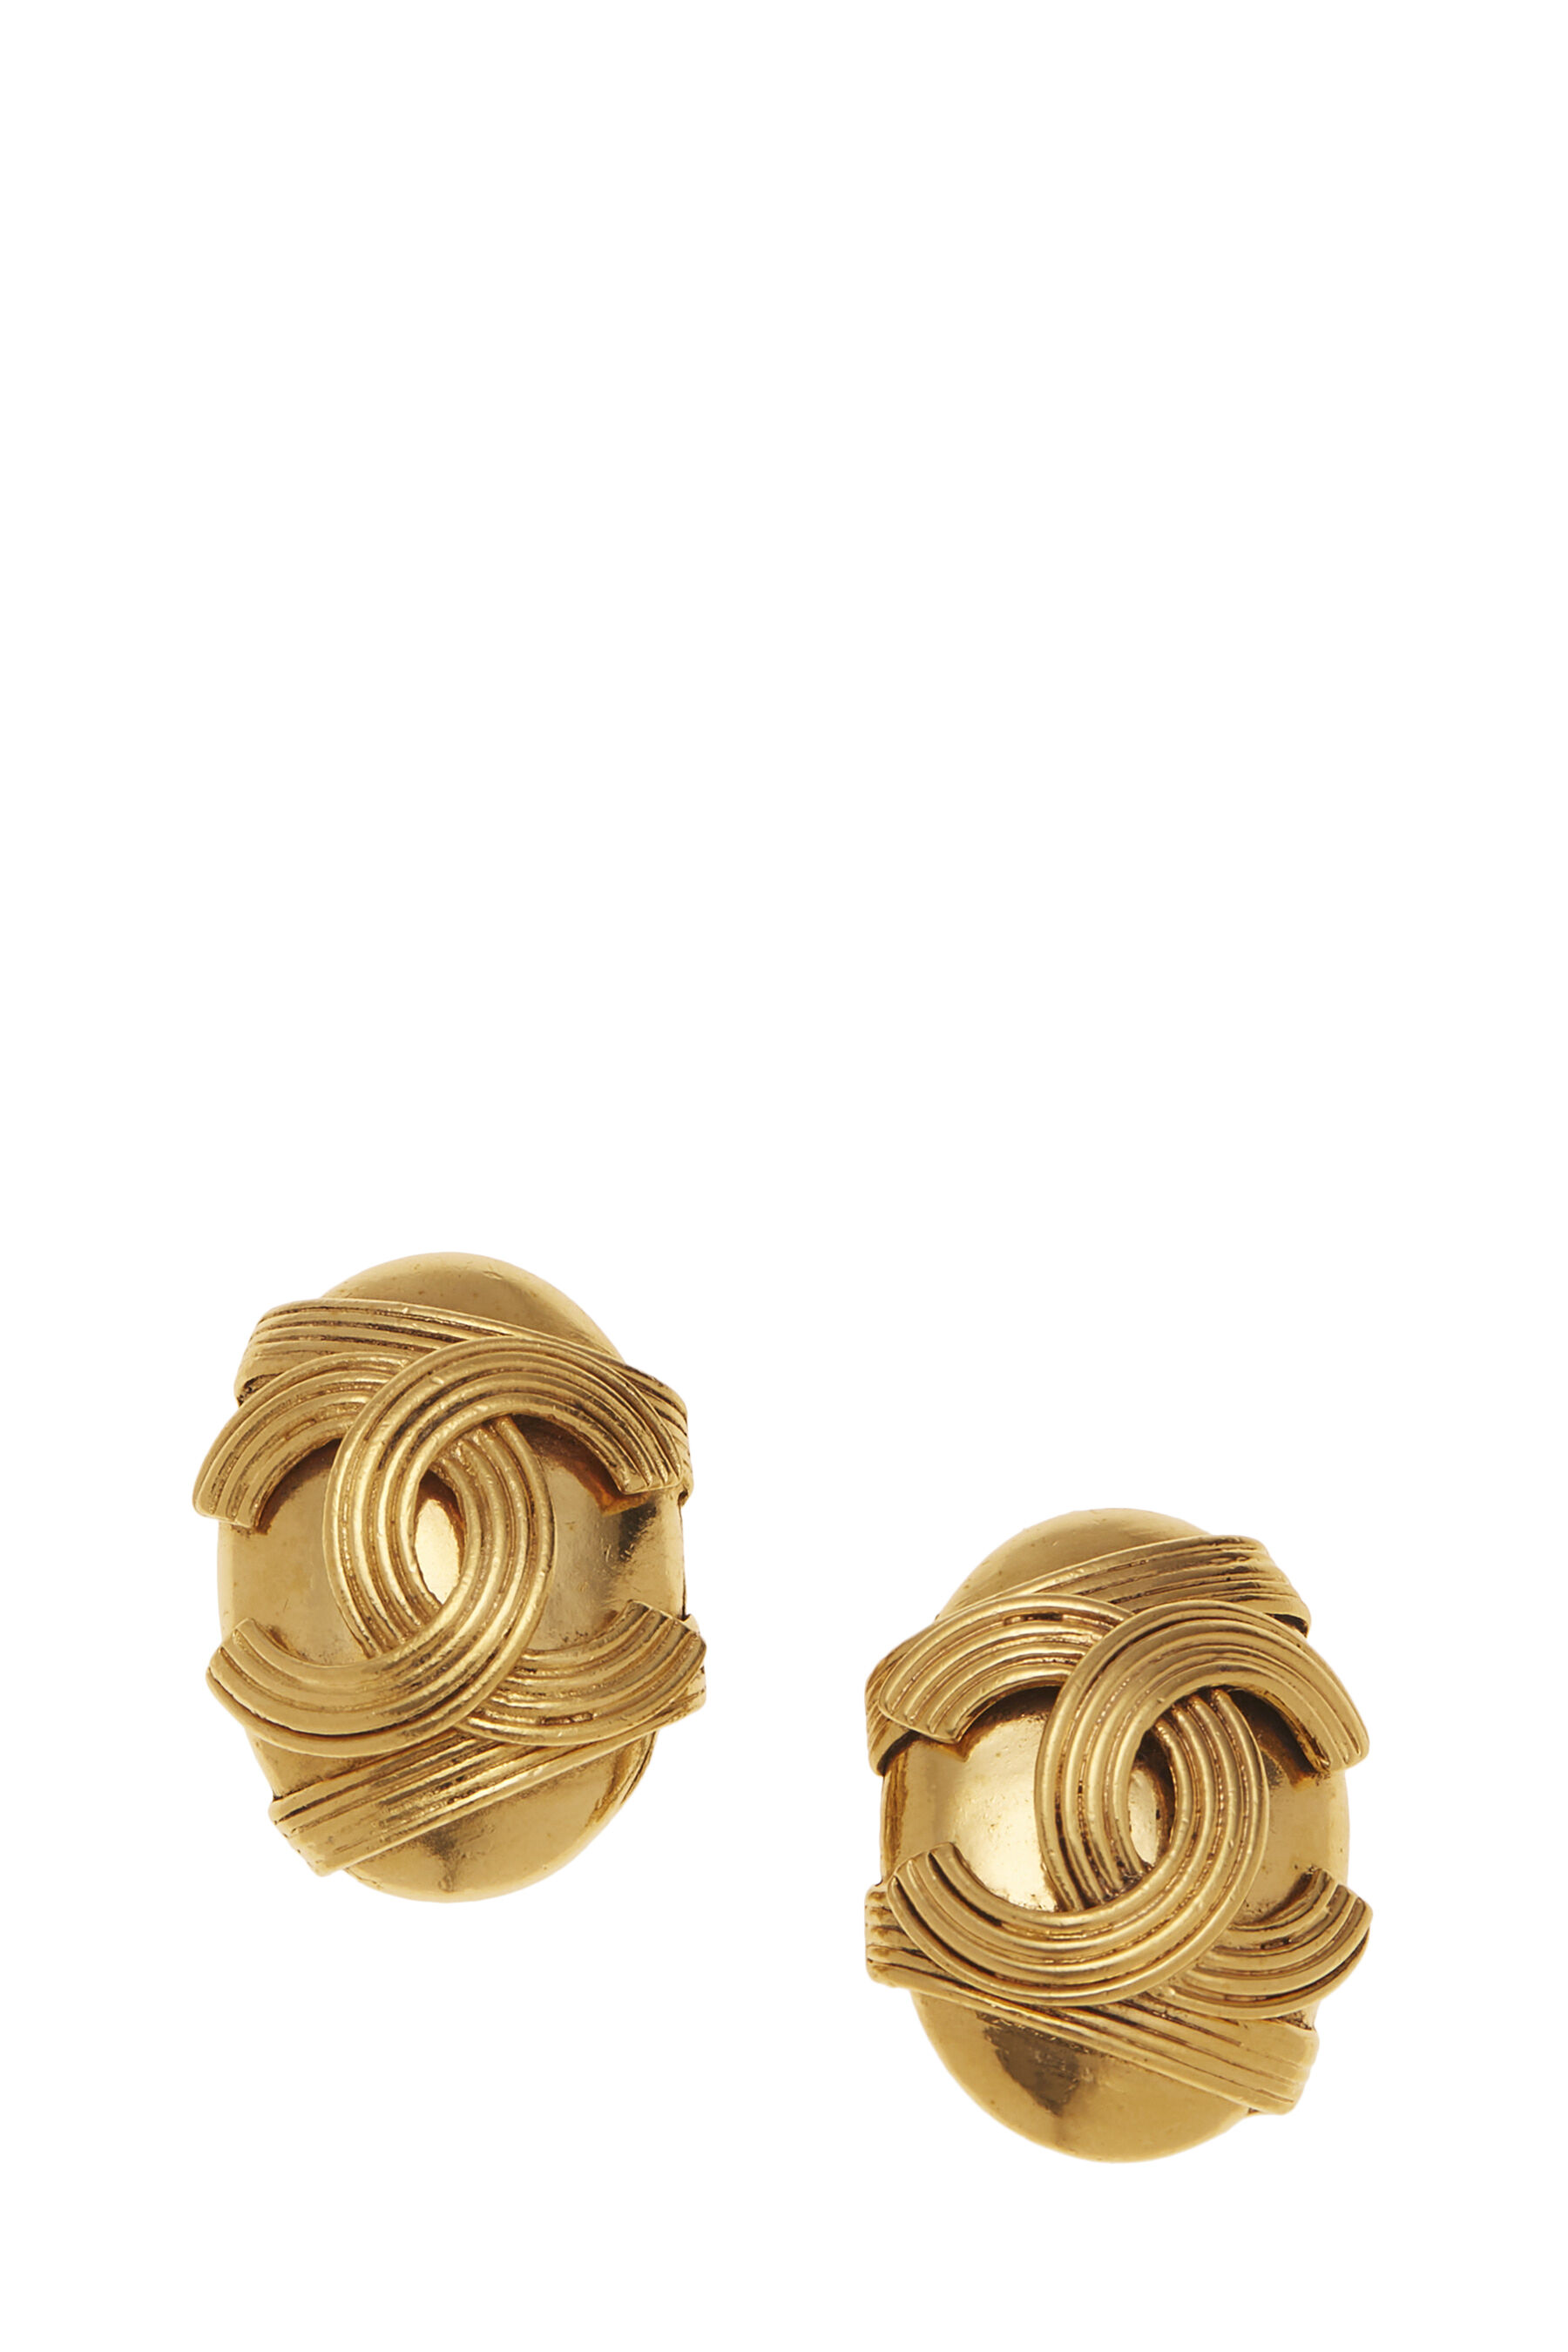 Chanel - Gold 'CC' Engraved Oval Earrings